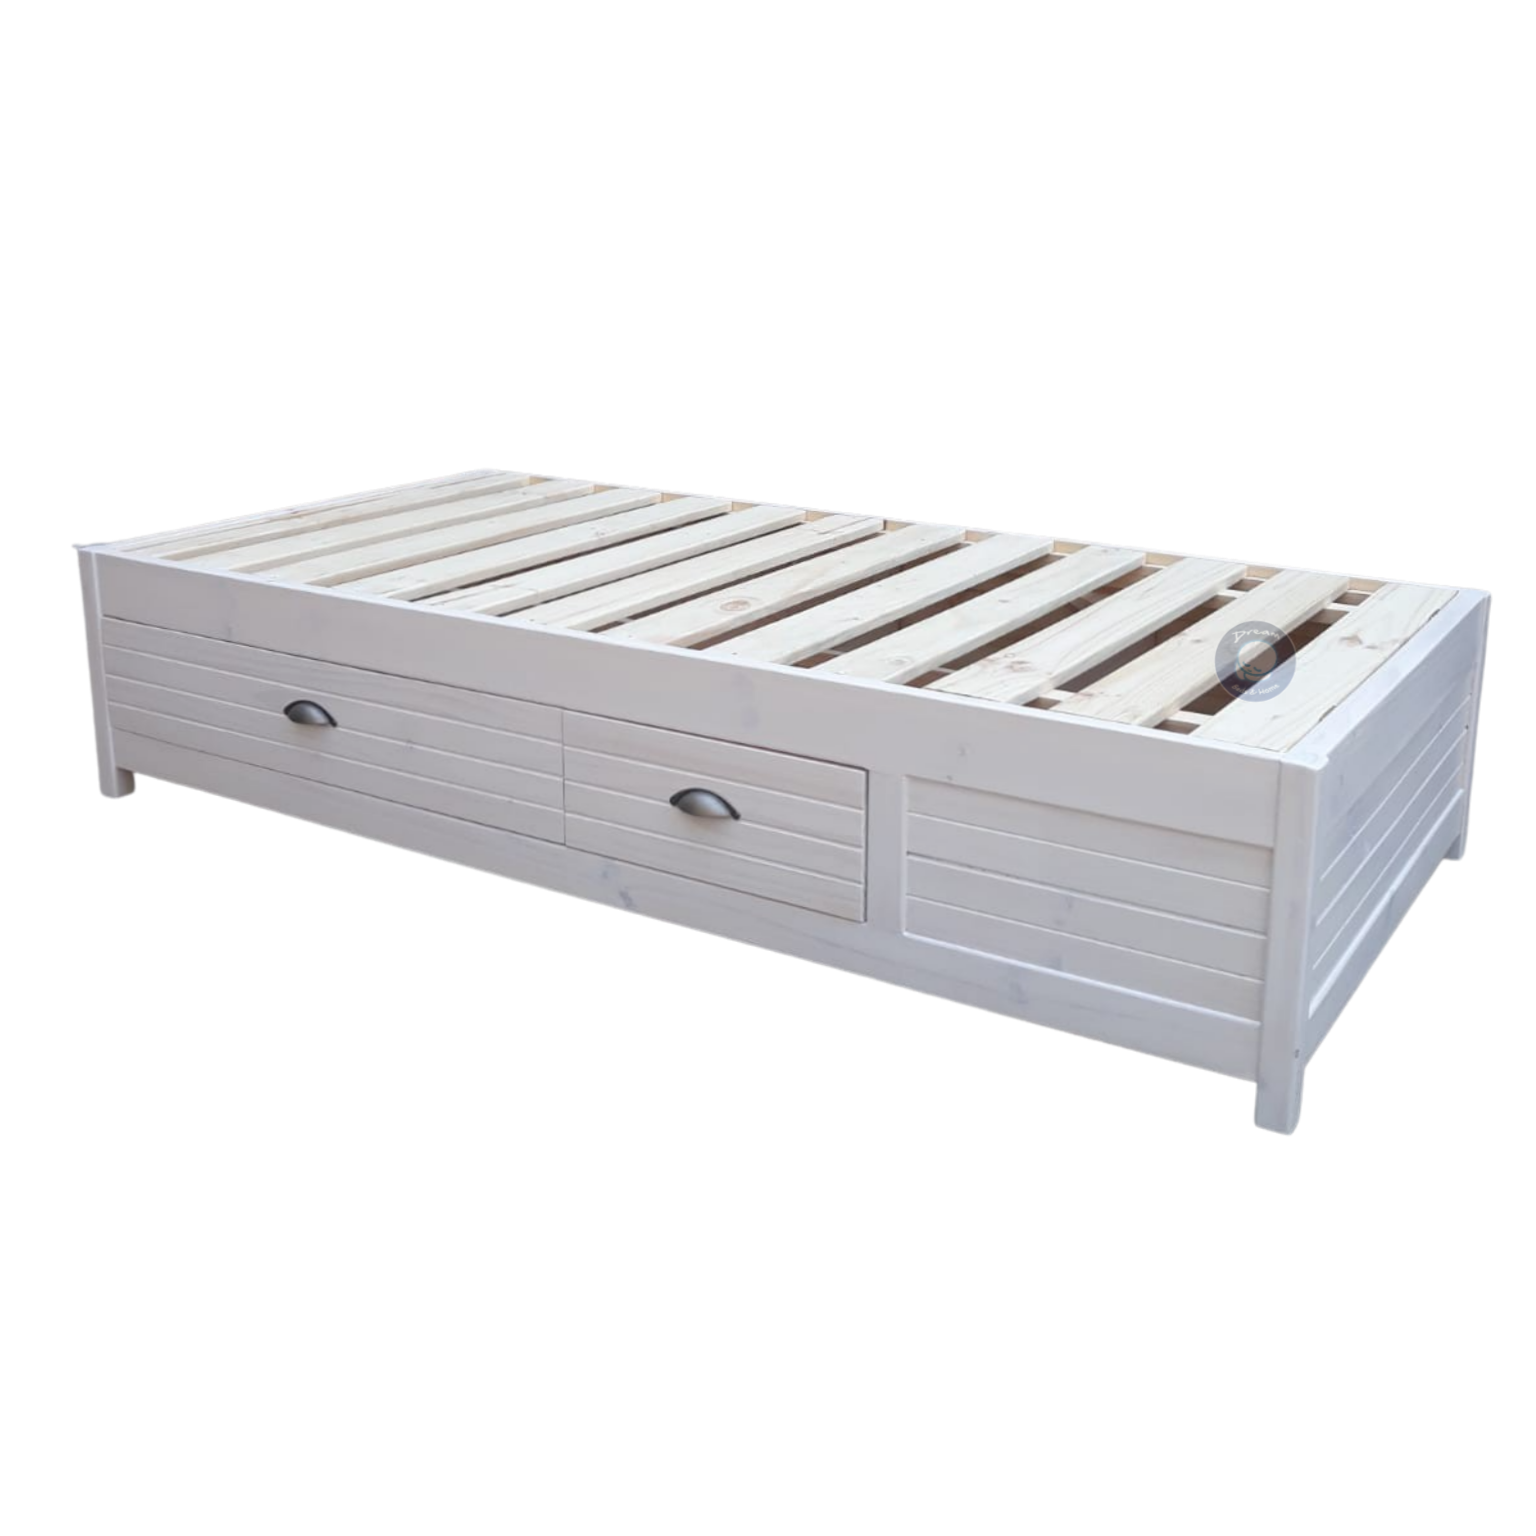 Single Storage Bed Base With 2 Drawers, King Size Bed Frame With Storage Drawers Underneath